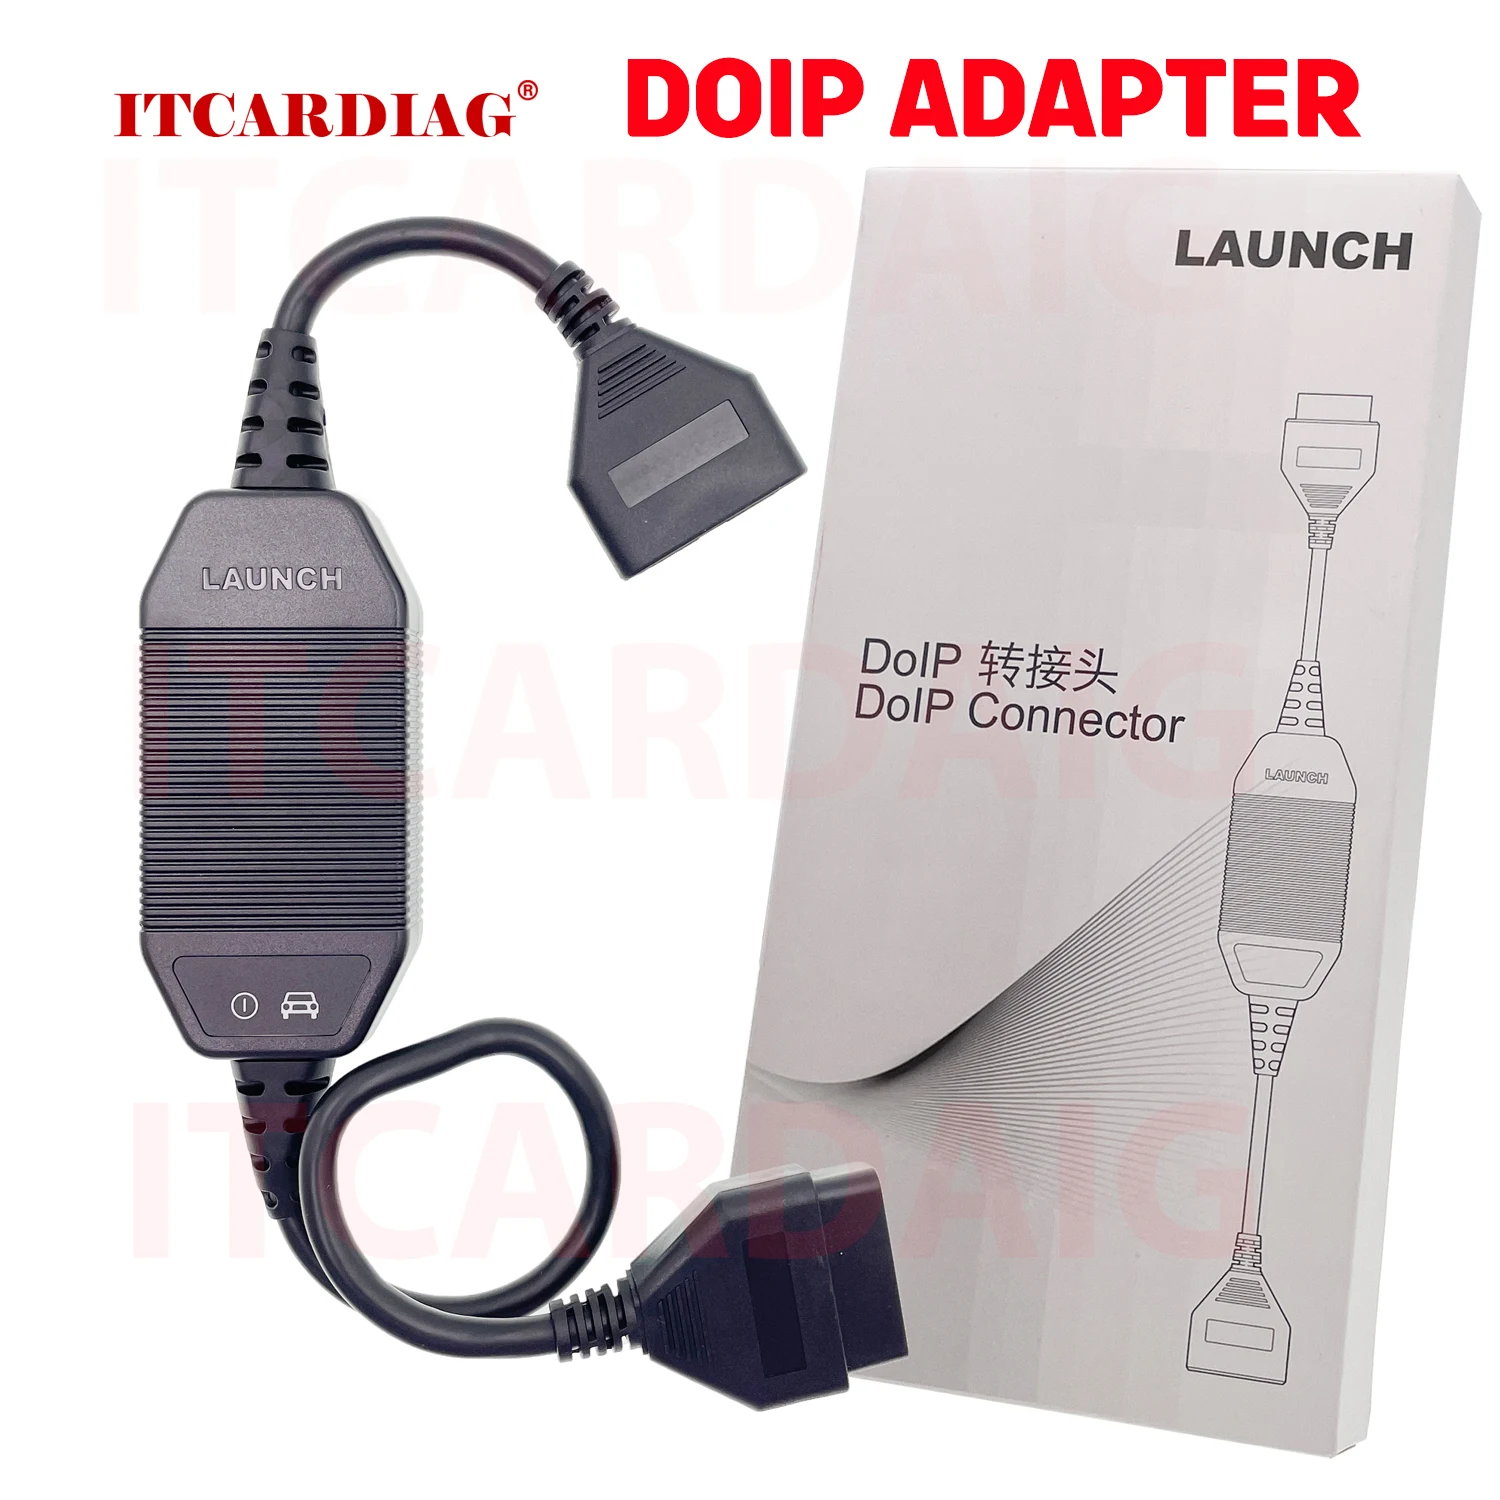 

New Launch Doip Cable Connector 16Pin For DBScar VII DBScar7 X431 PAD V X431 PRO ELITE CRP919E Works With Doip Protocols Cars